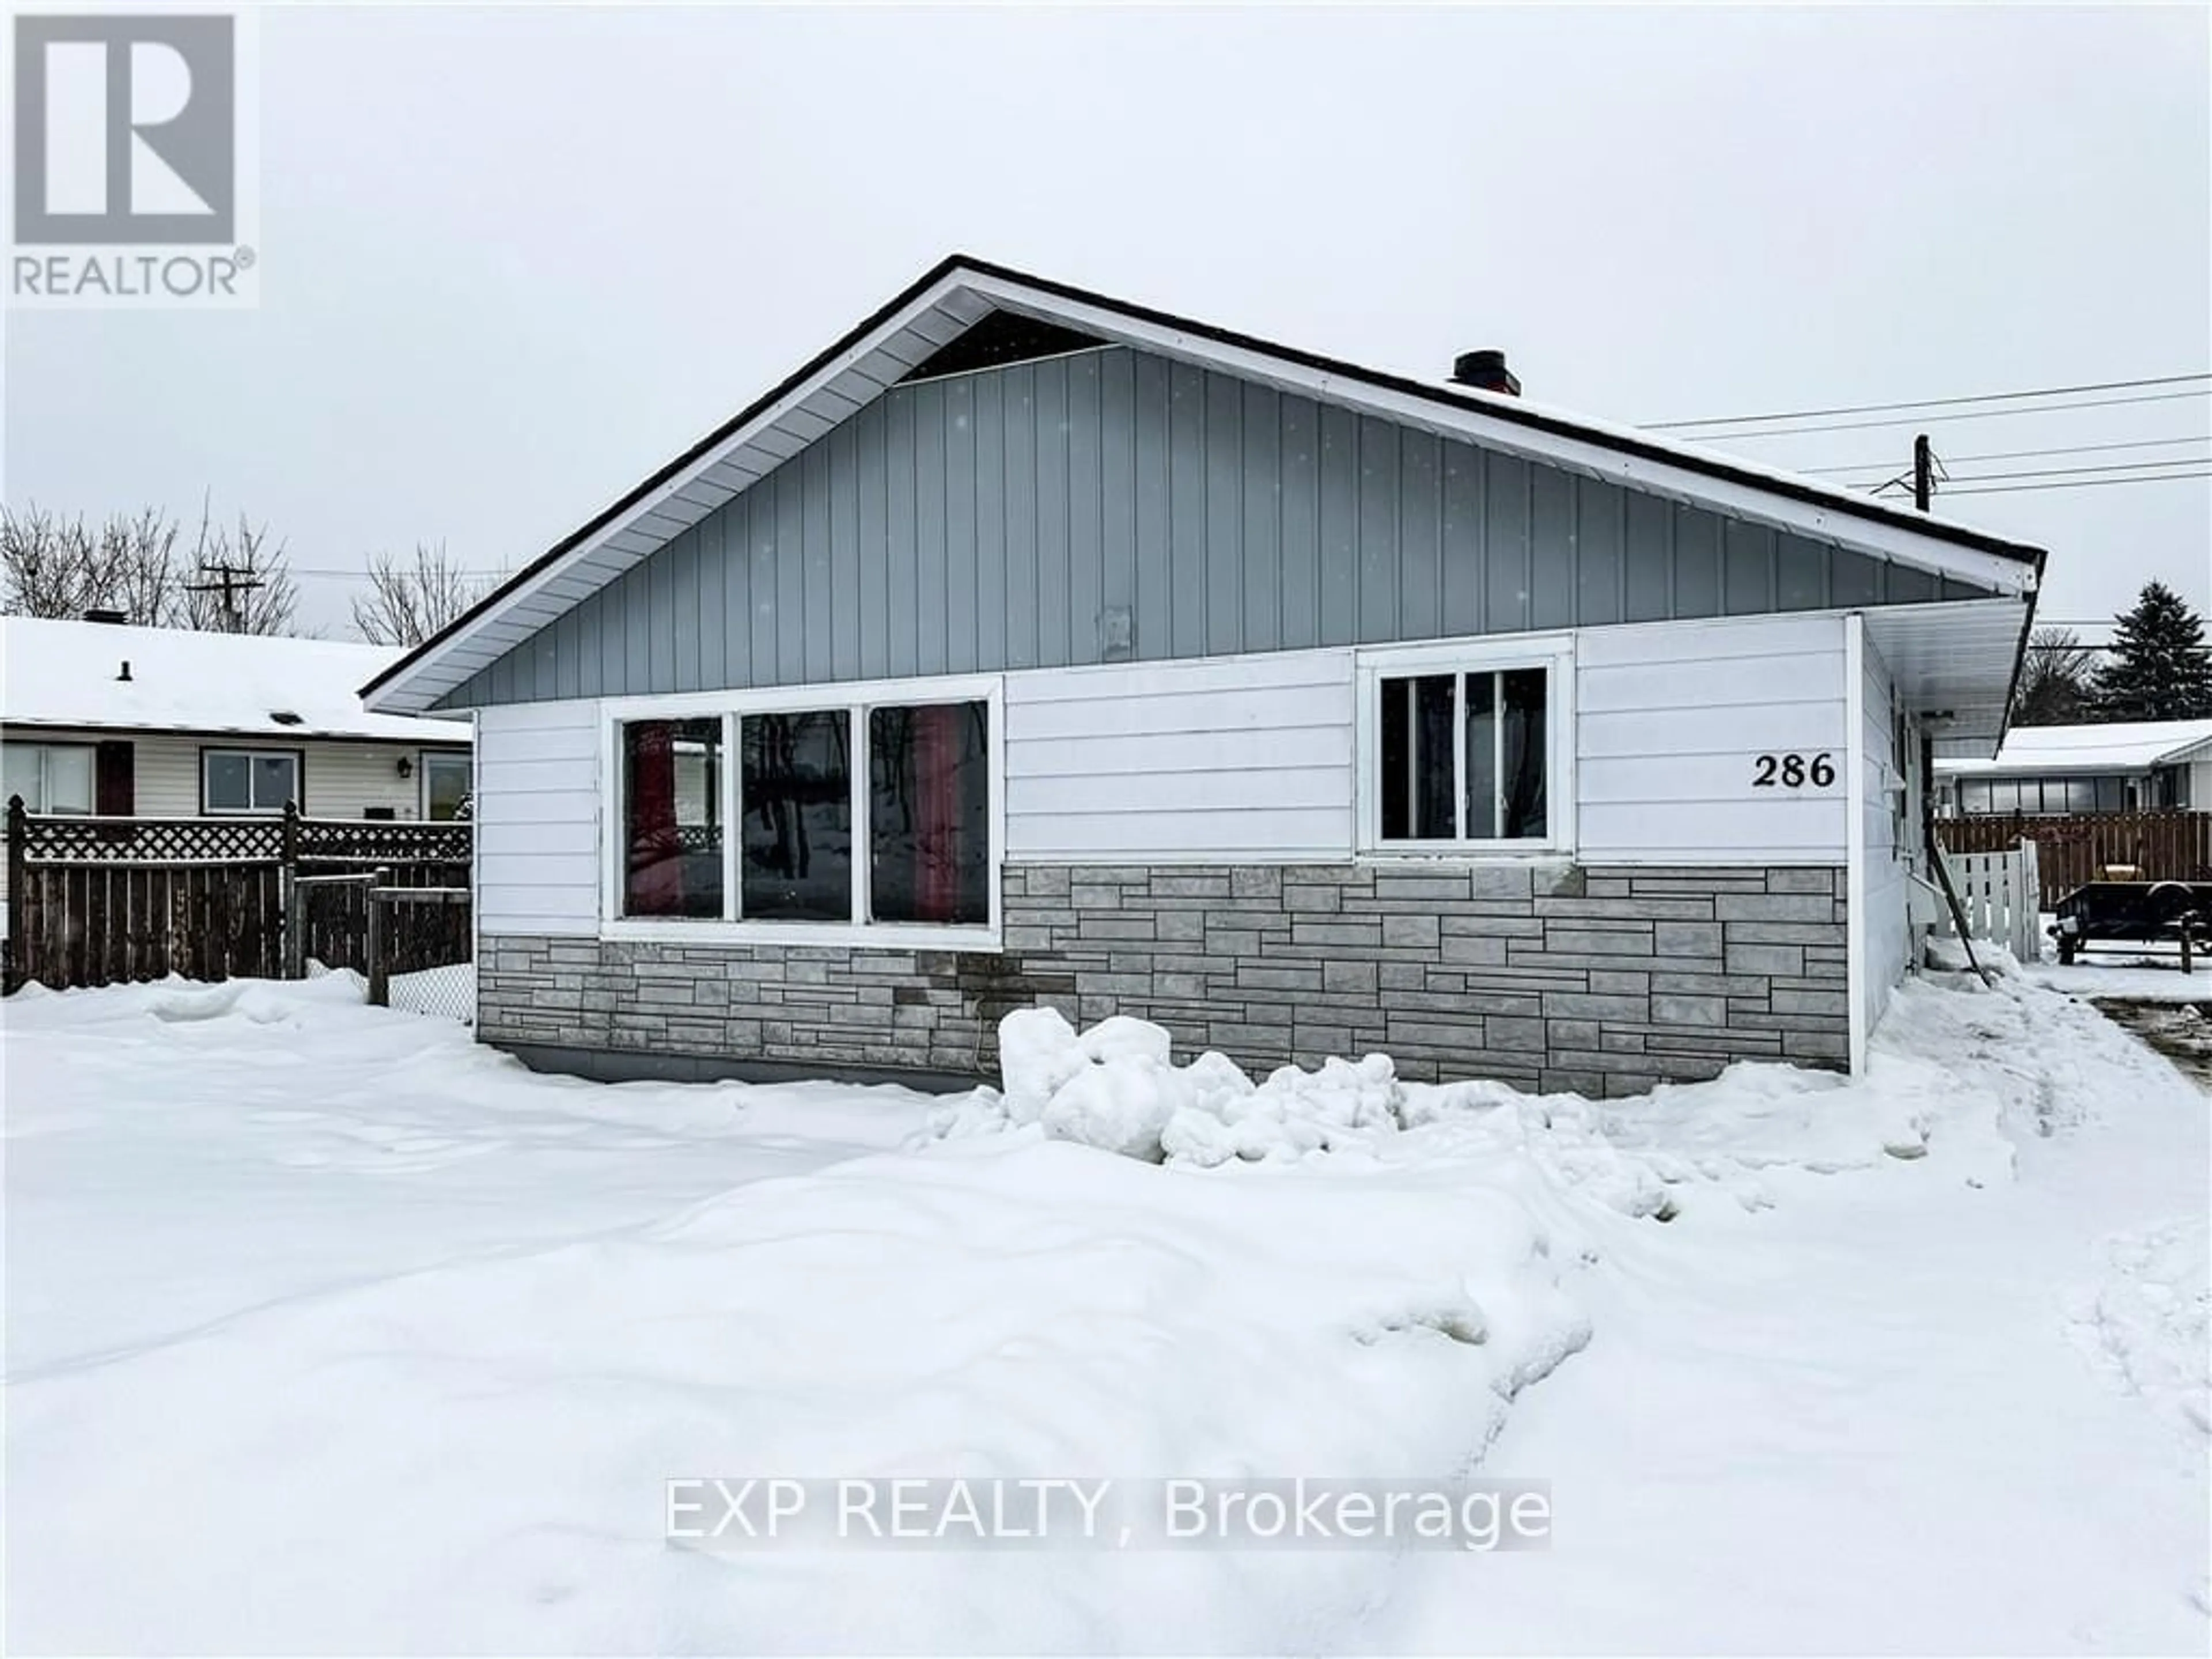 Home with unknown exterior material for 286 Mississauga Ave, Elliot Lake Ontario P5A 1E7